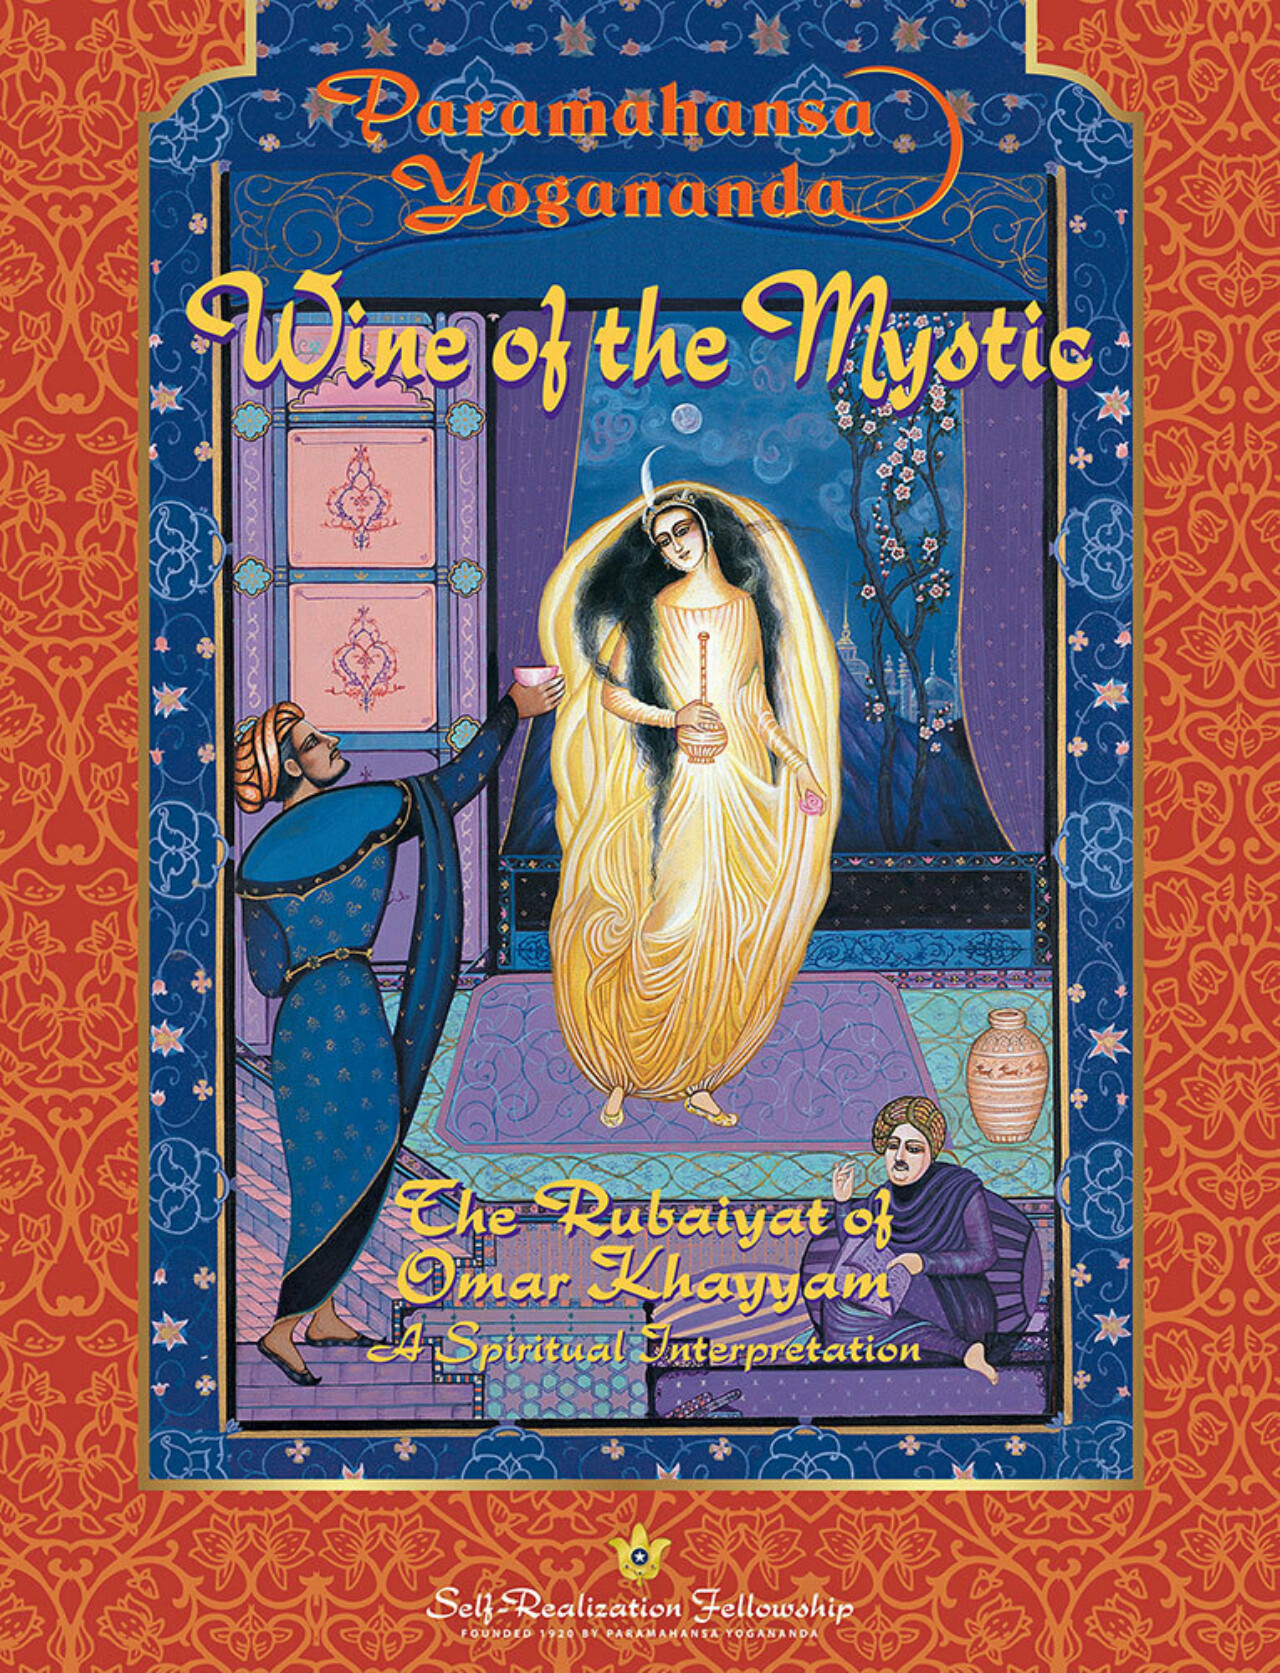 W Ine of the Mystic ebook front cover